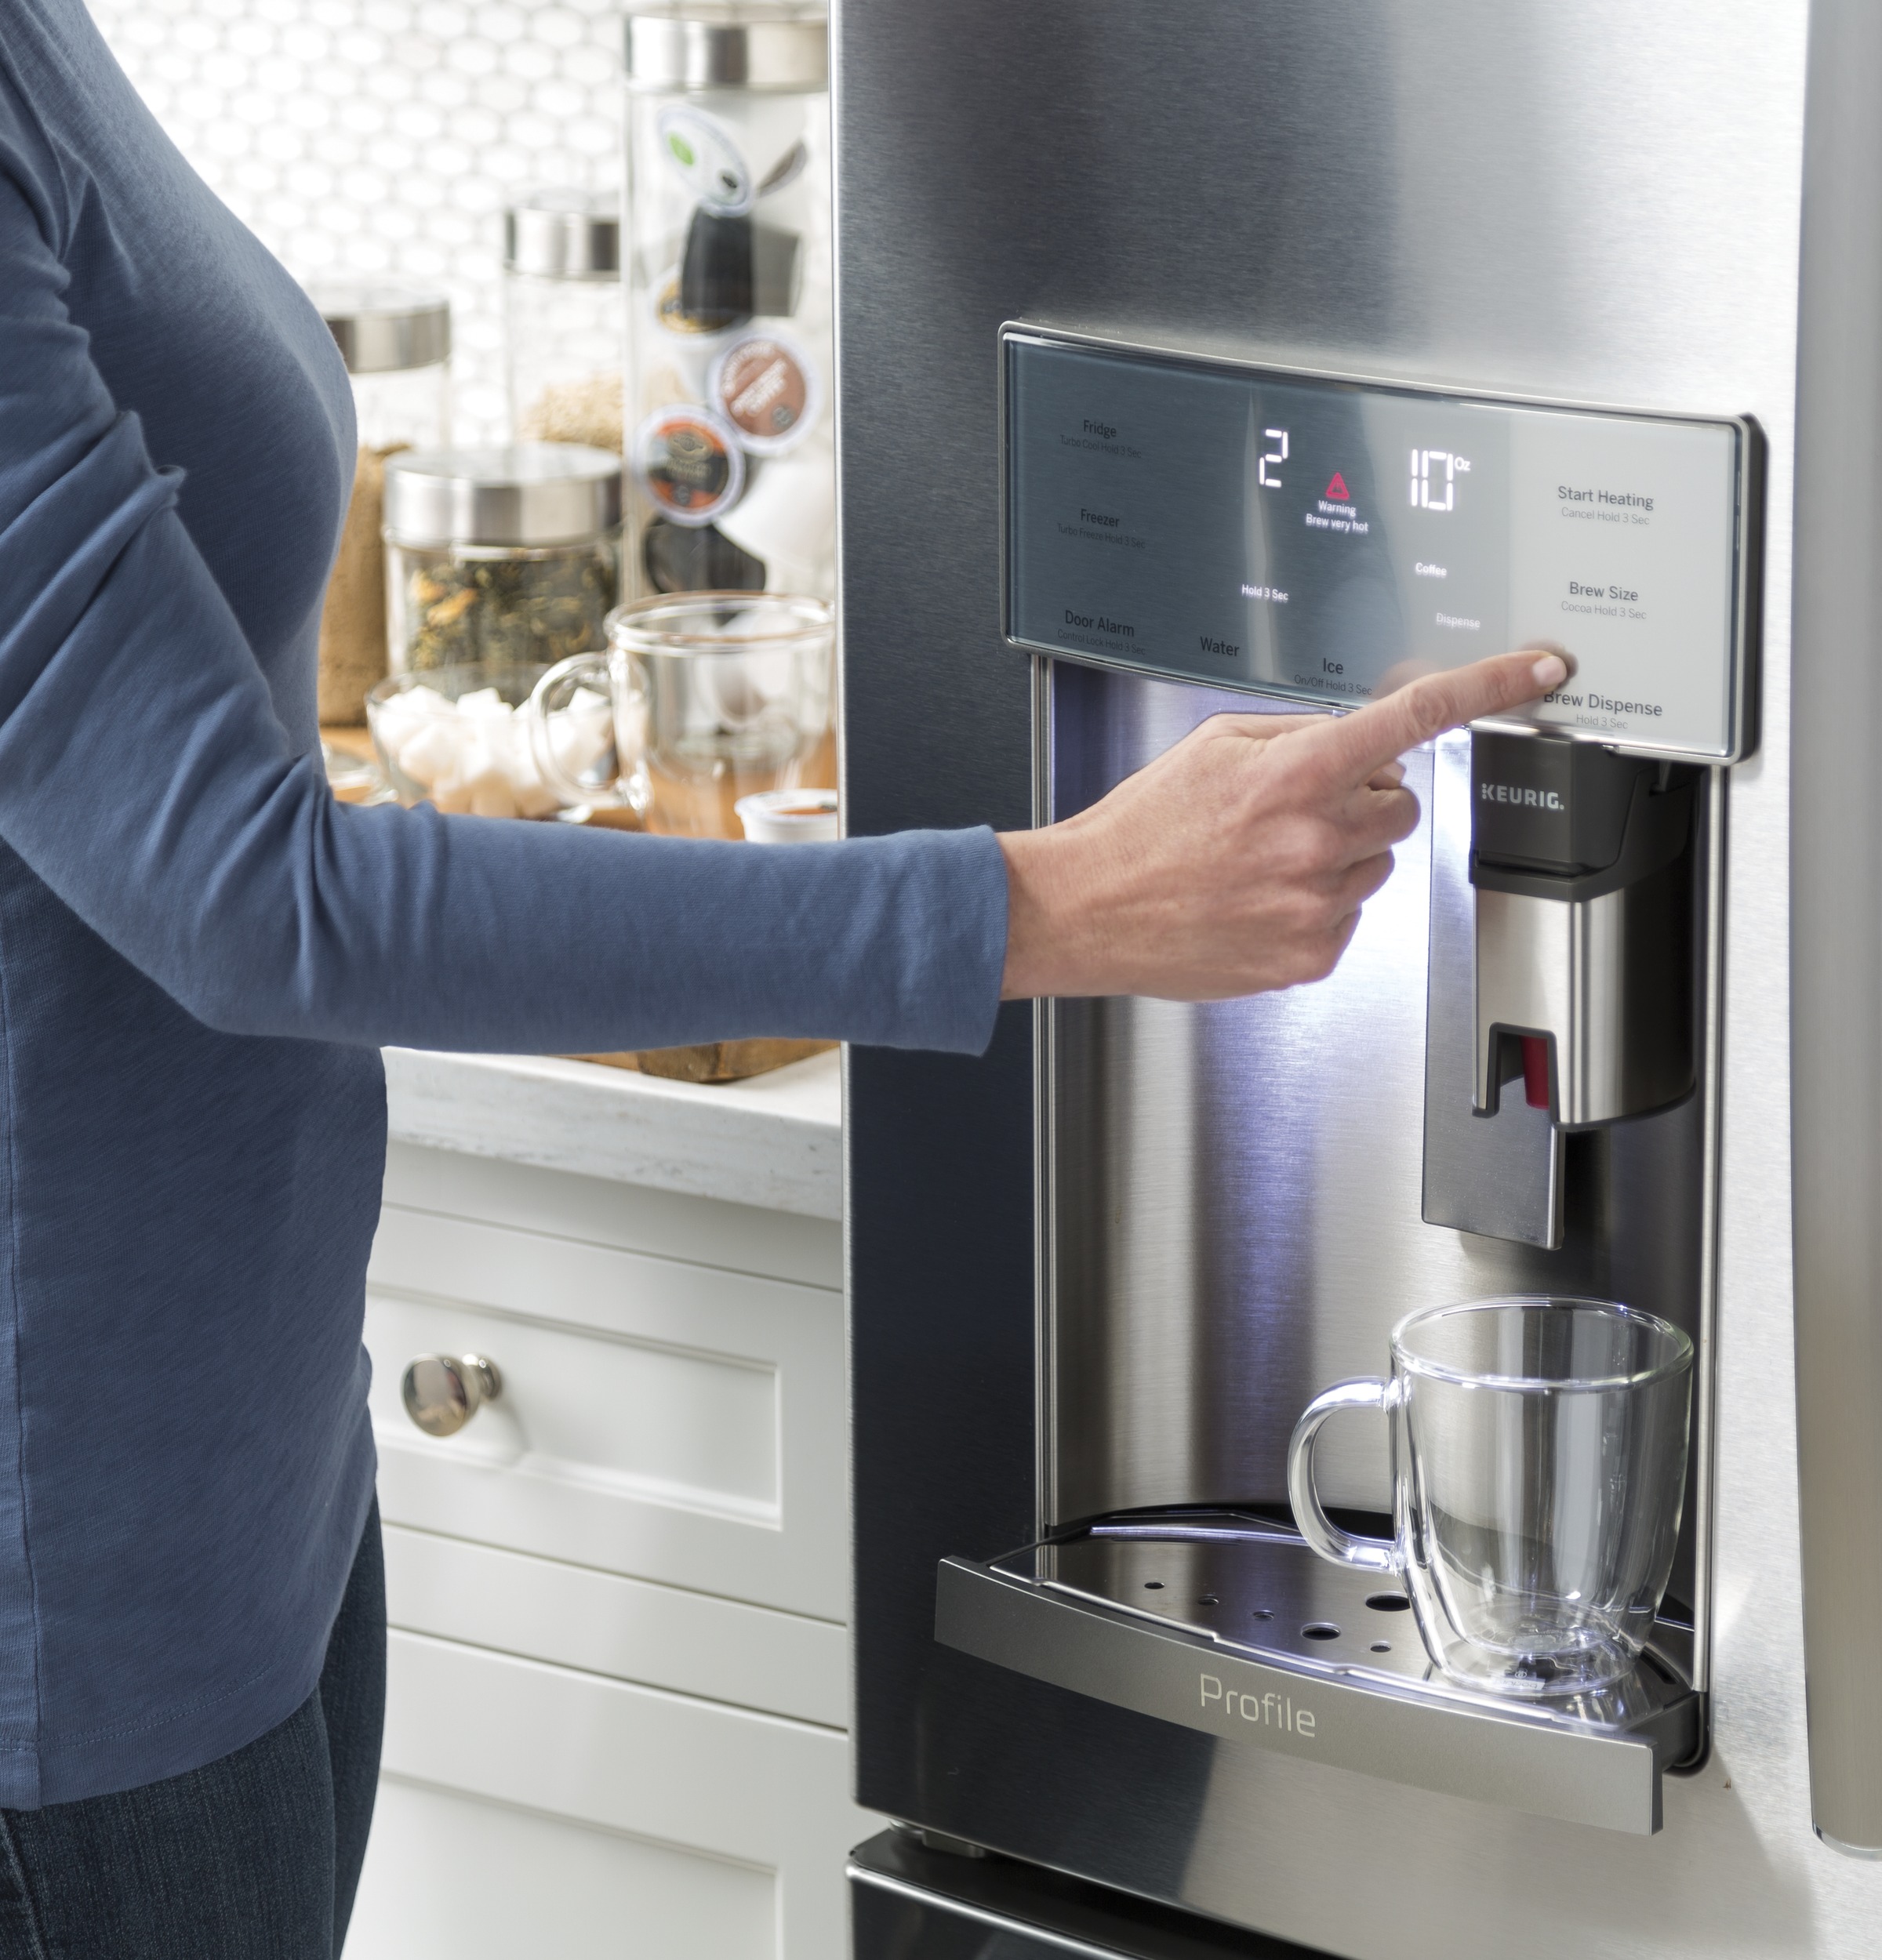 Make Holiday Prep Easy with GE Profile Appliances at Best Buy